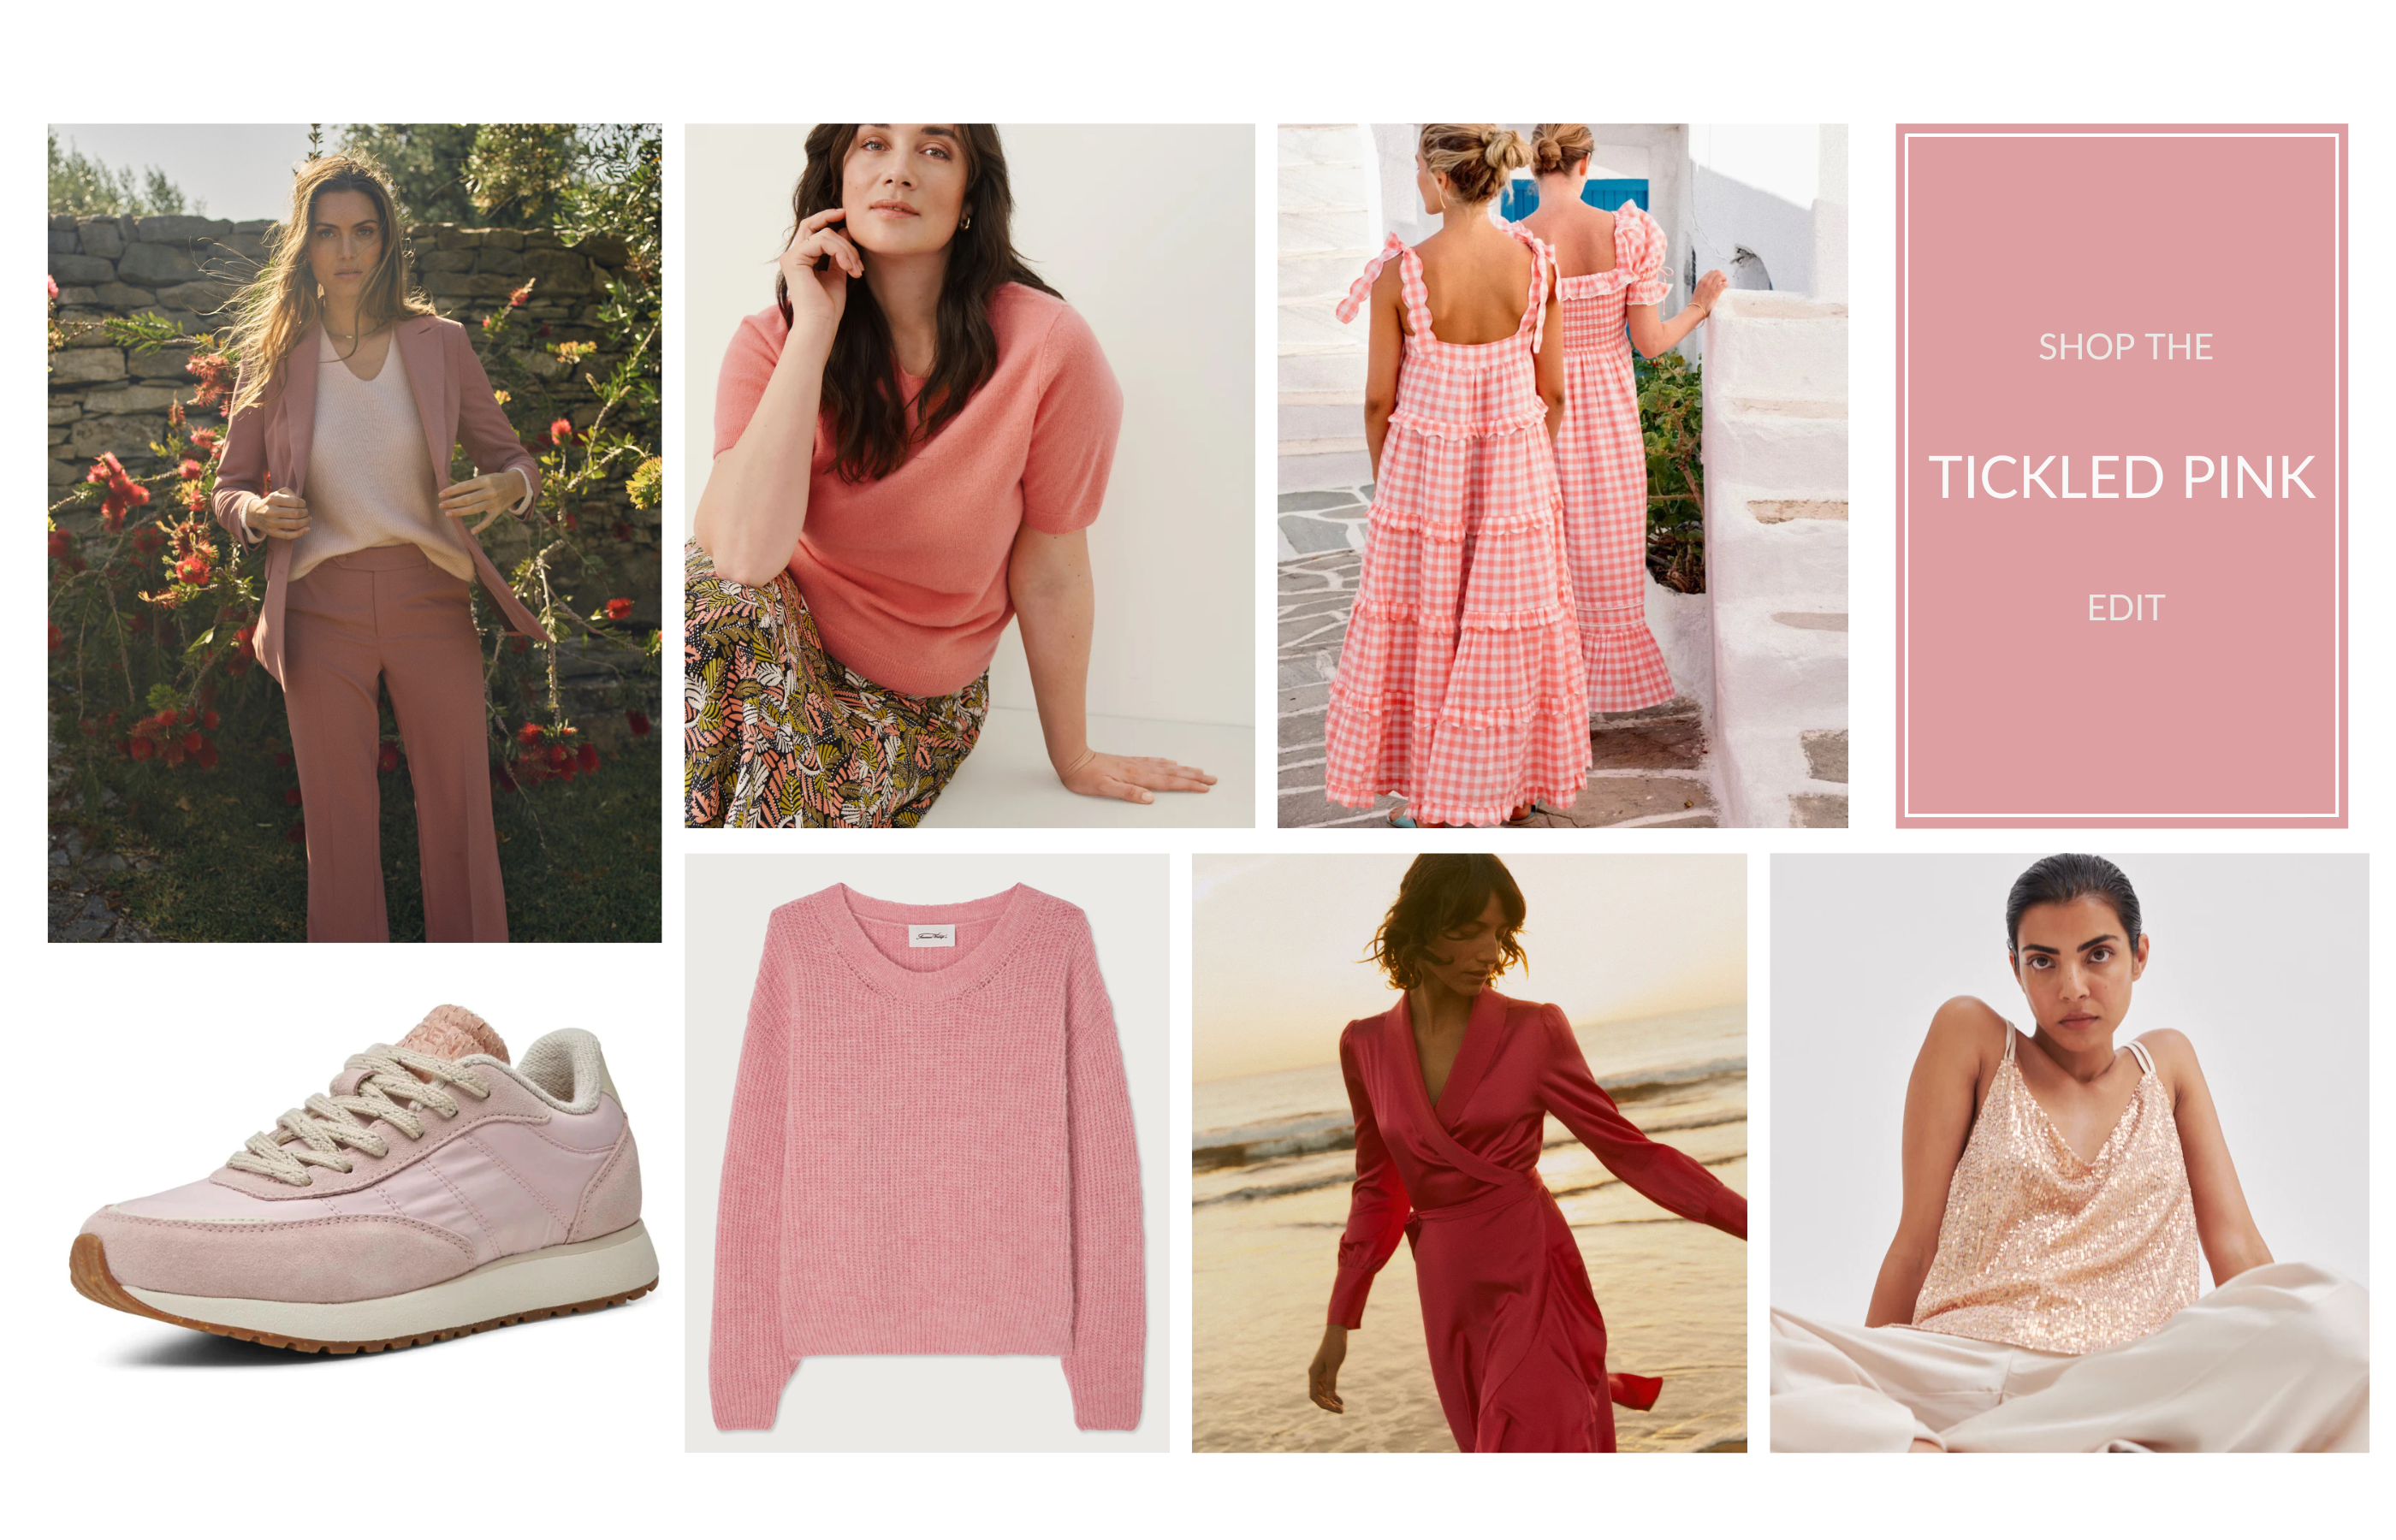 Shop the Tickled Pink Trend